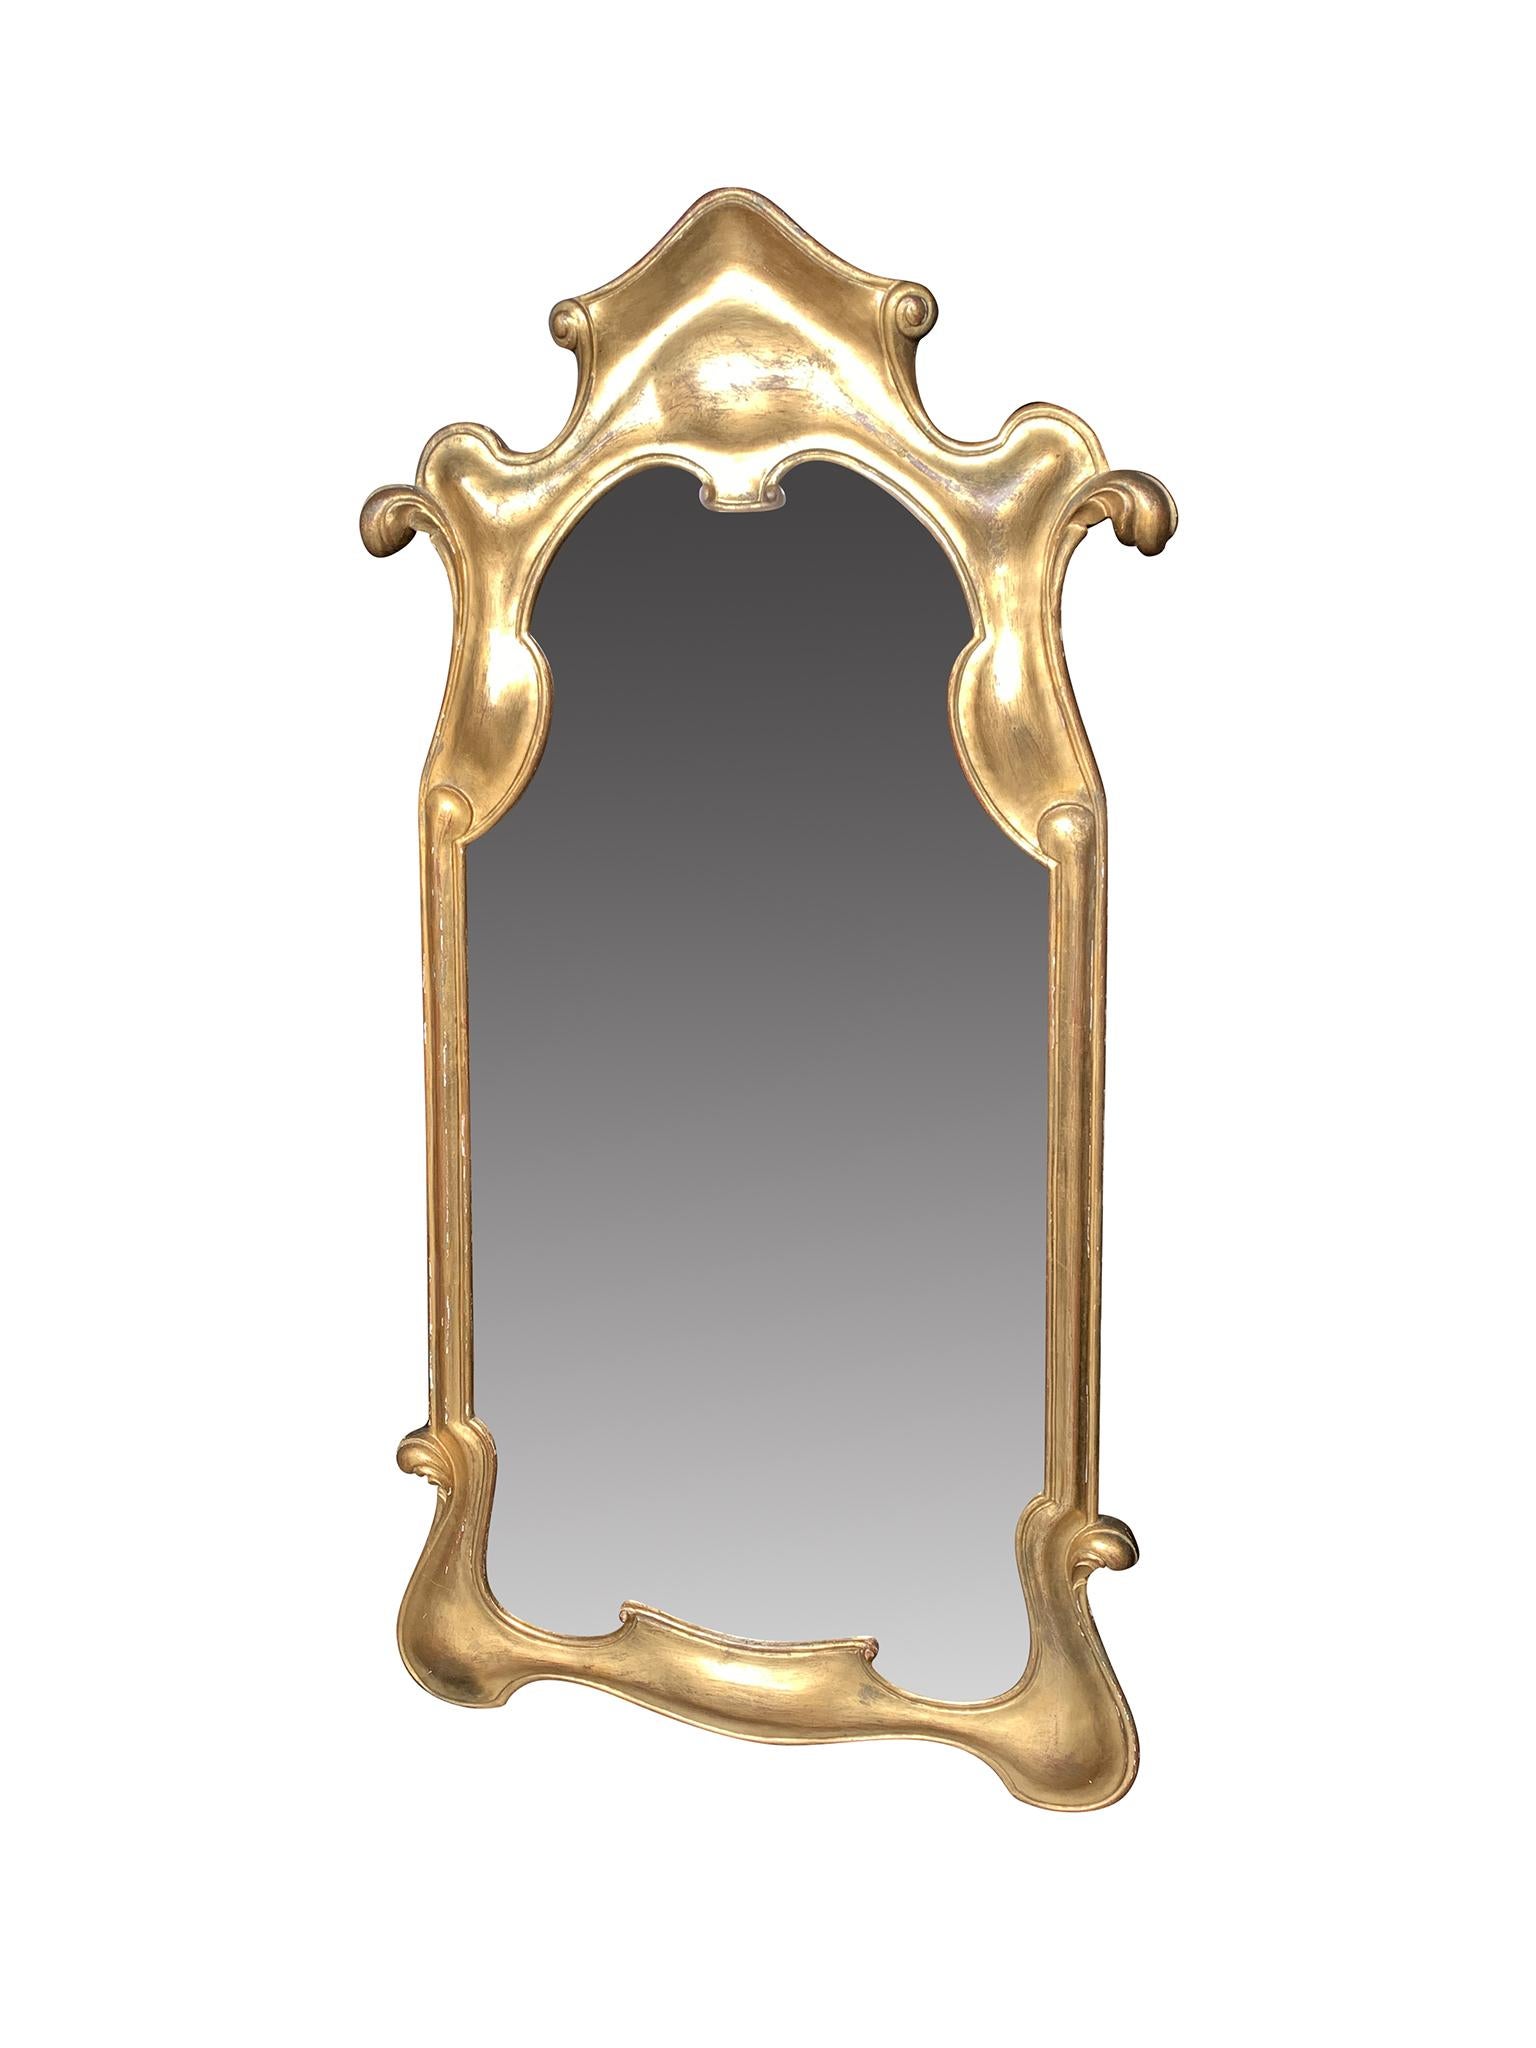 Mid-century giltwood wall mirror, crafted in Italy. The frame has beautiful smooth, rounded curves and the wood has aged well.

Dimensions:
26.25 in. width
54 in. height
1.5 in. depth

Condition notes:
In good condition with surface wear